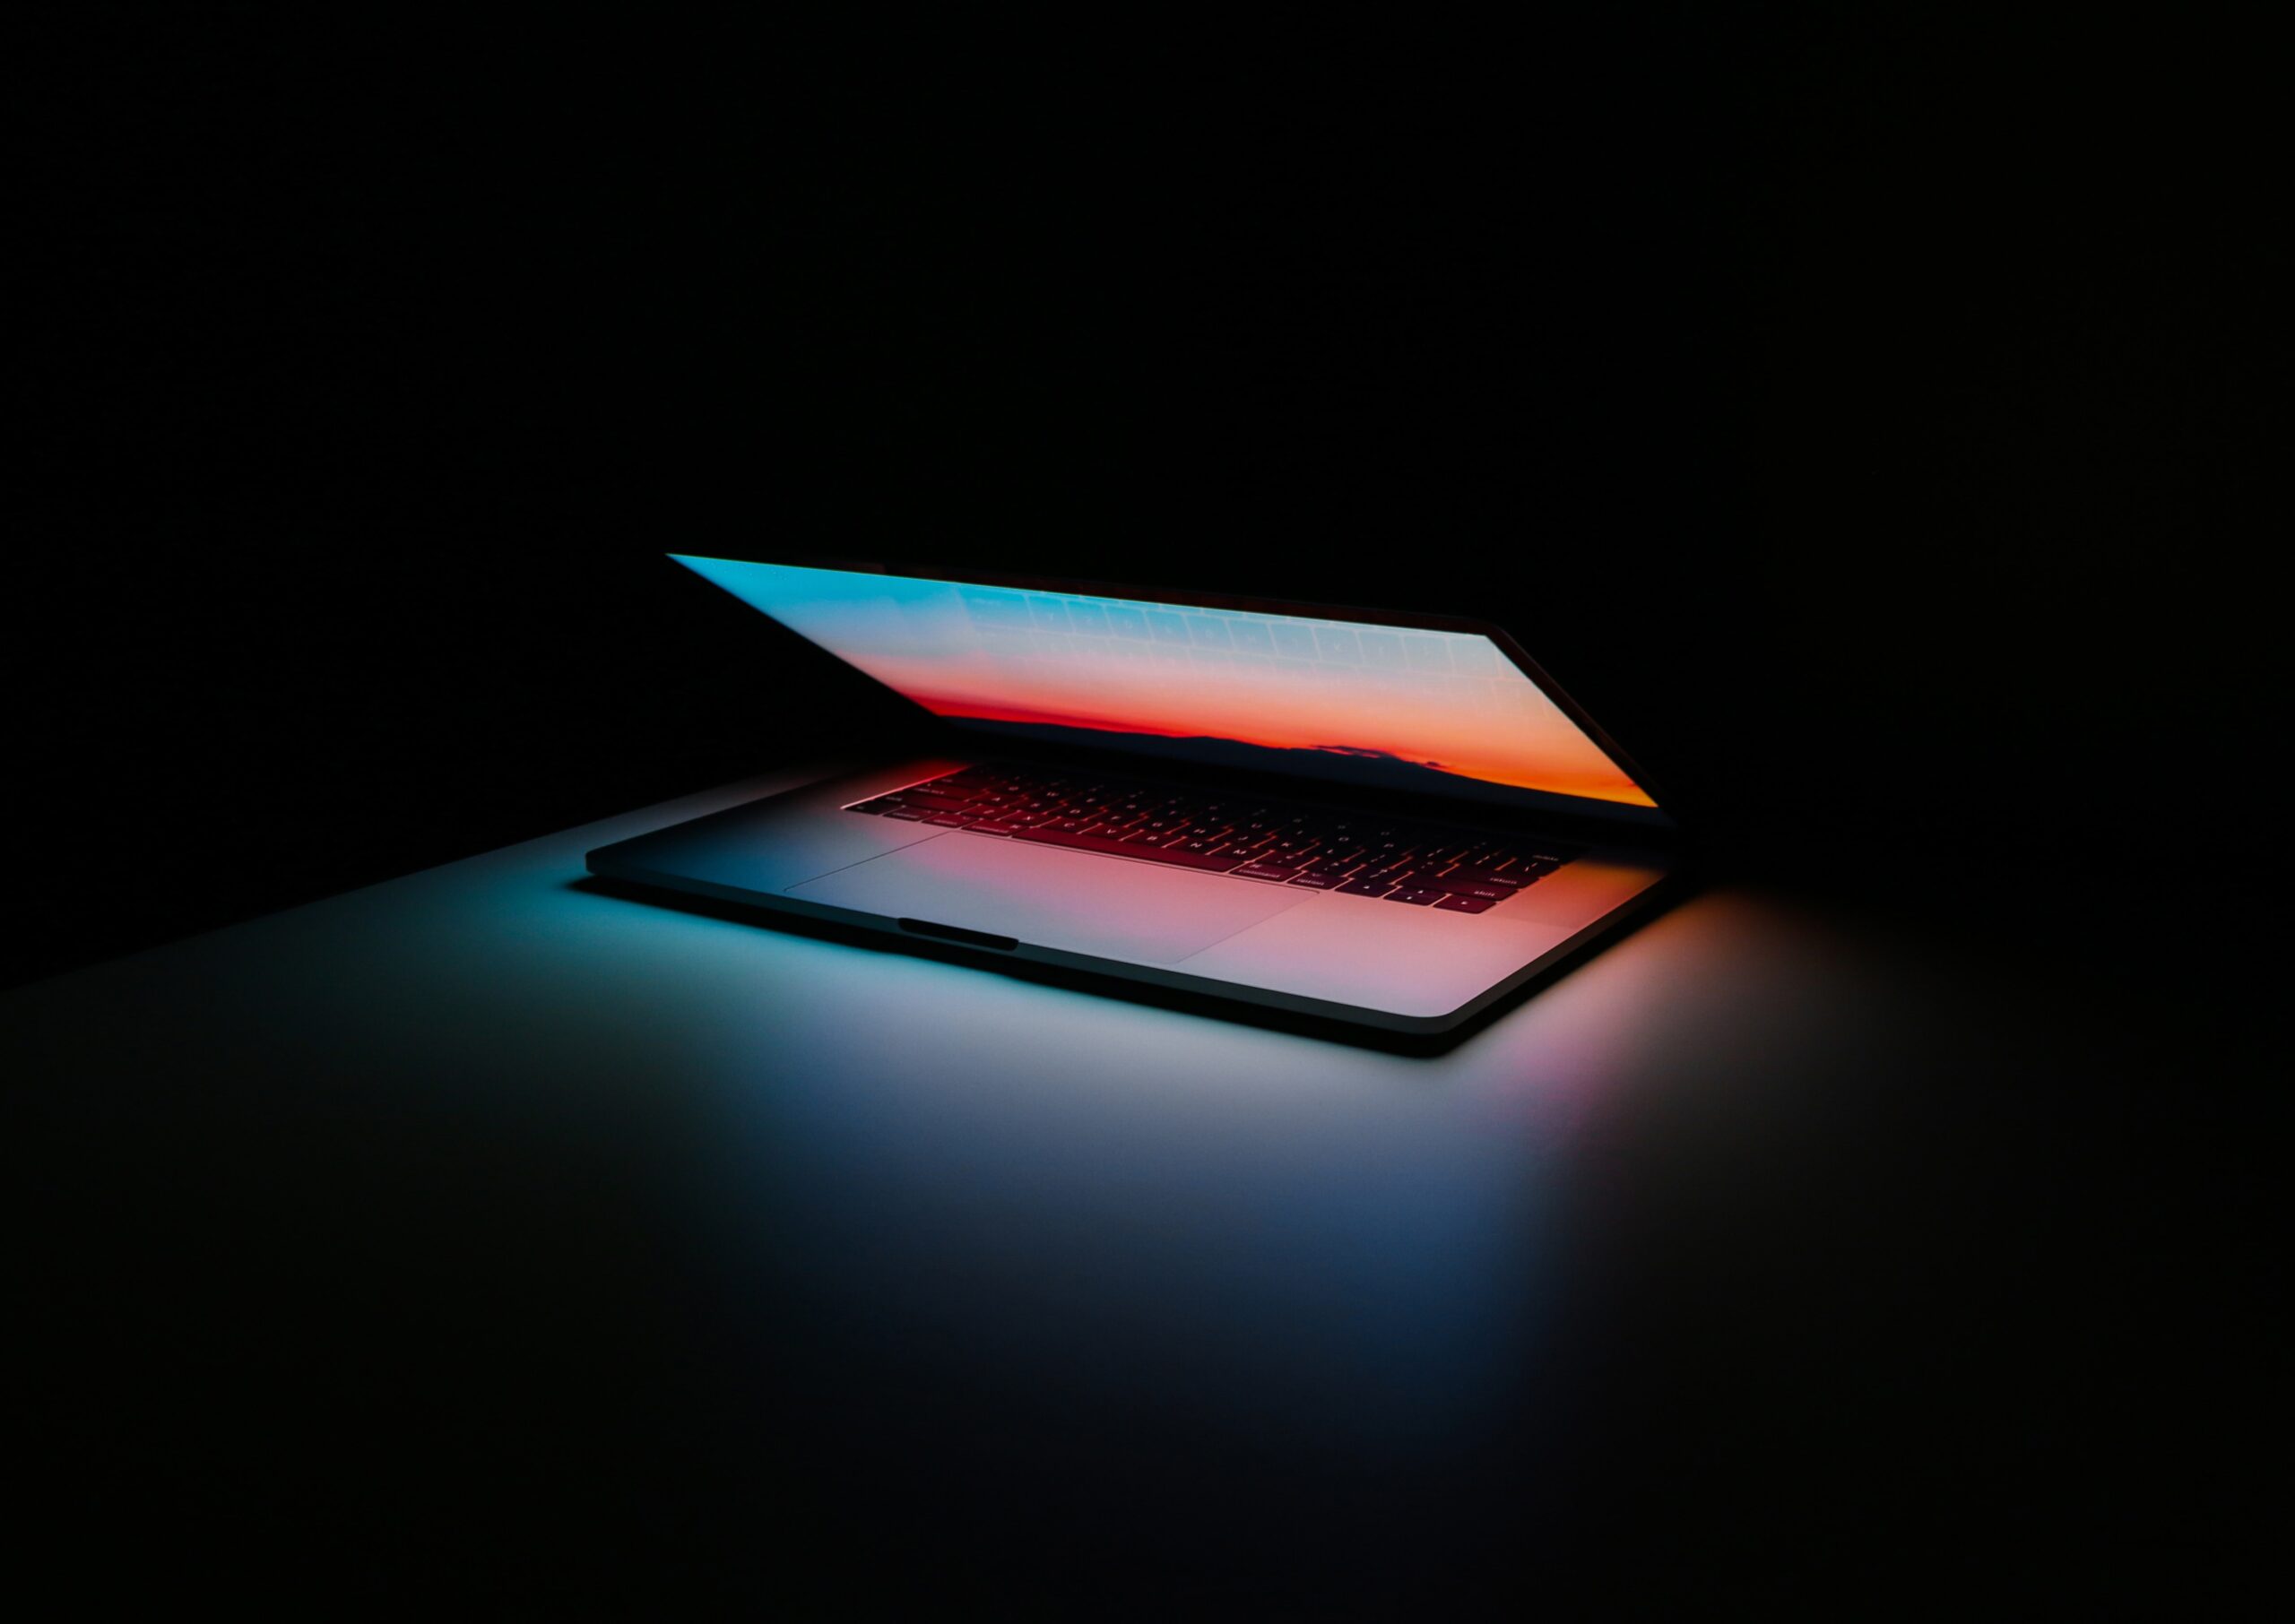 Partway opened laptop casting blue and orange light on a table in a dark room.